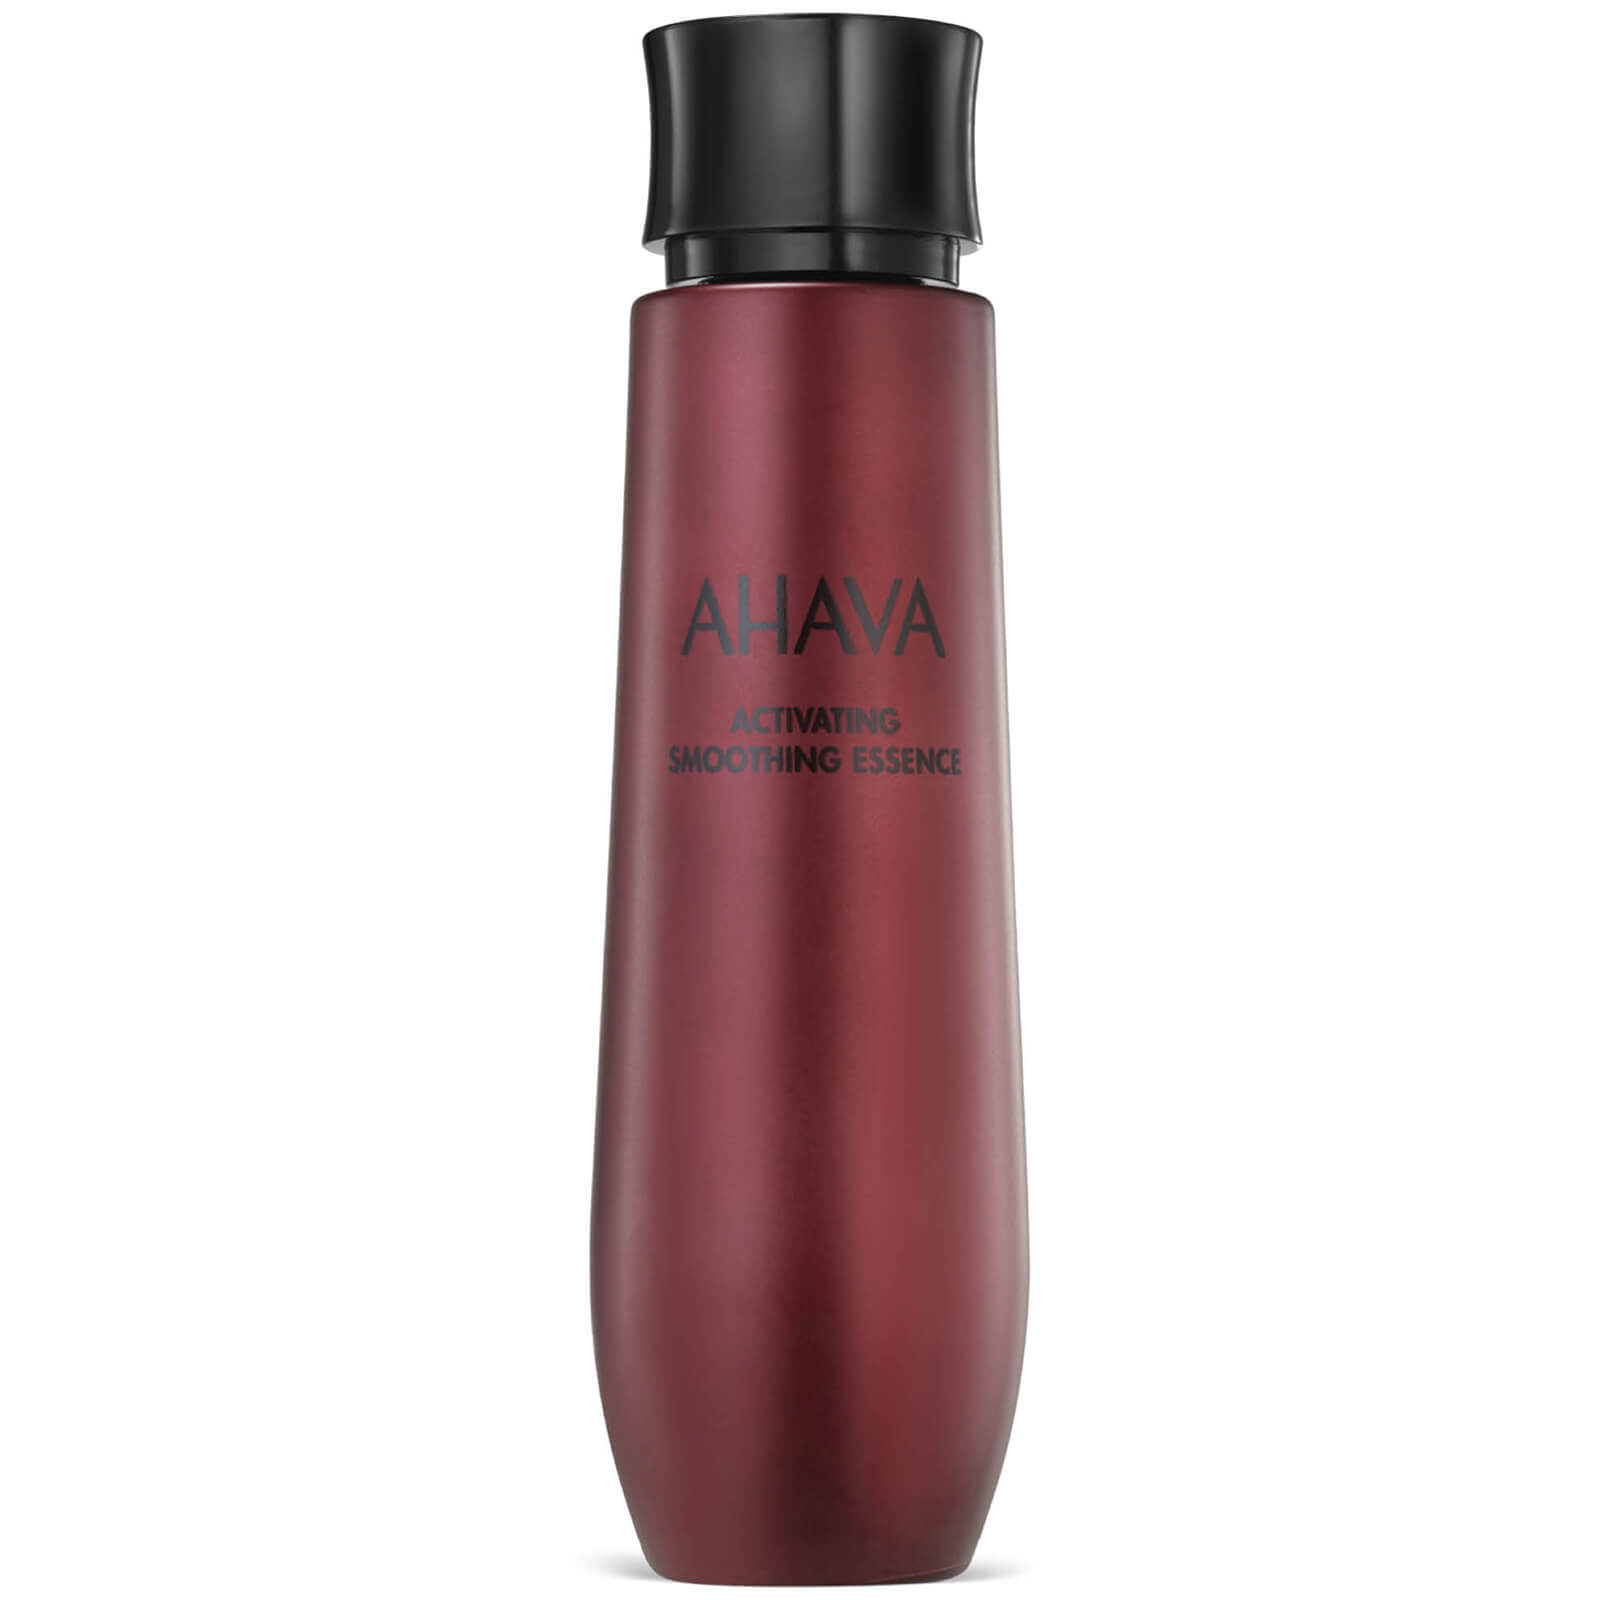 Photos - Cream / Lotion AHAVA Exclusive Activating Smoothing Essence 100ml 80214065 